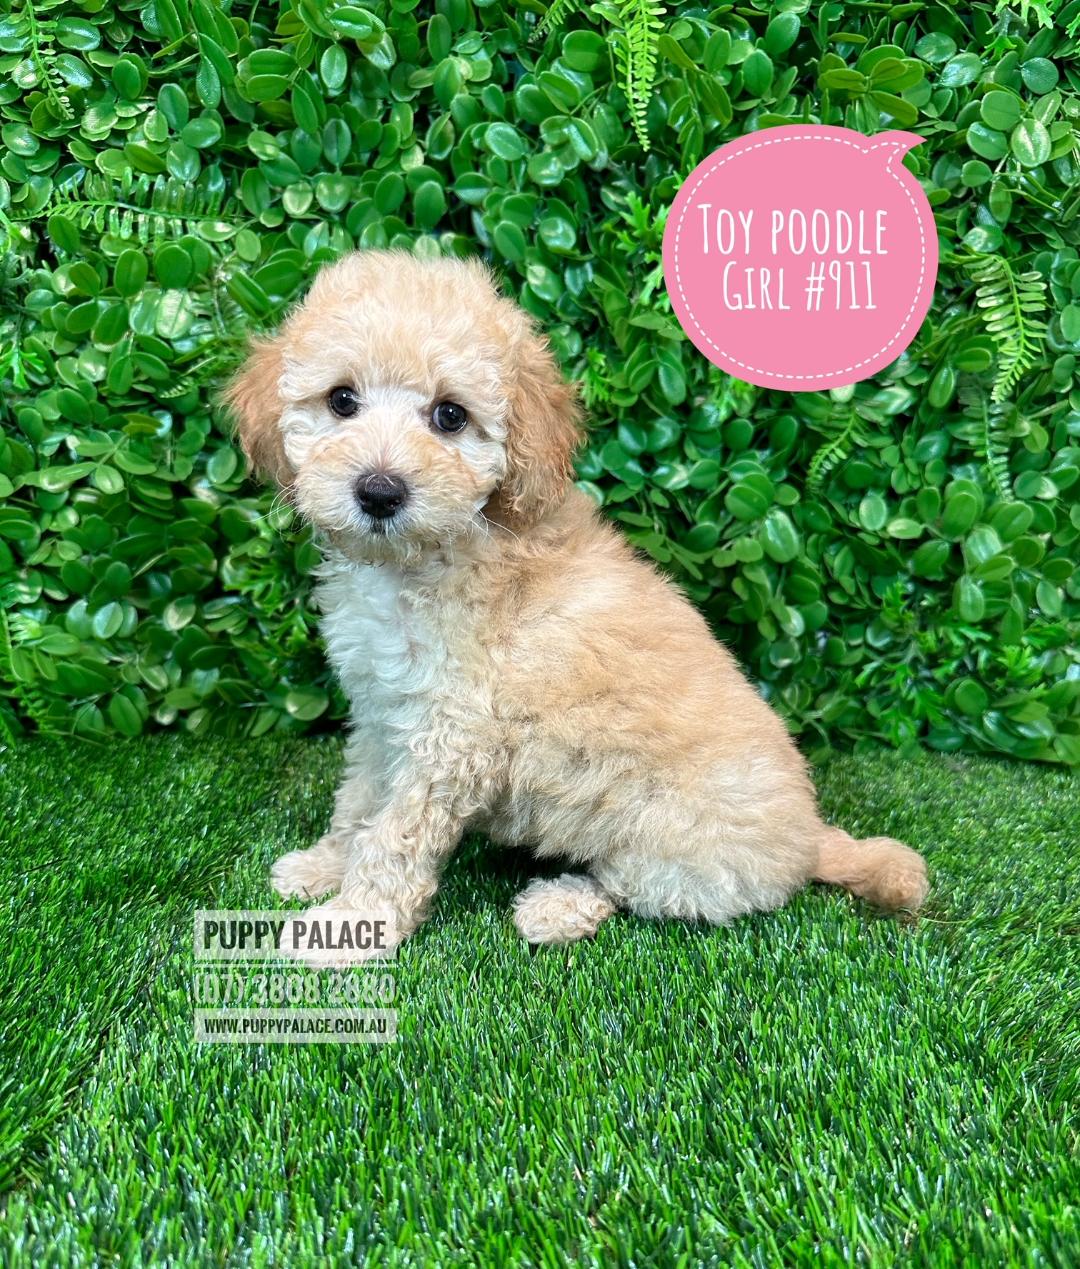 I HAVE NOW FOUND MY FUREVER HOME – Toy Poodle Puppies – Girl